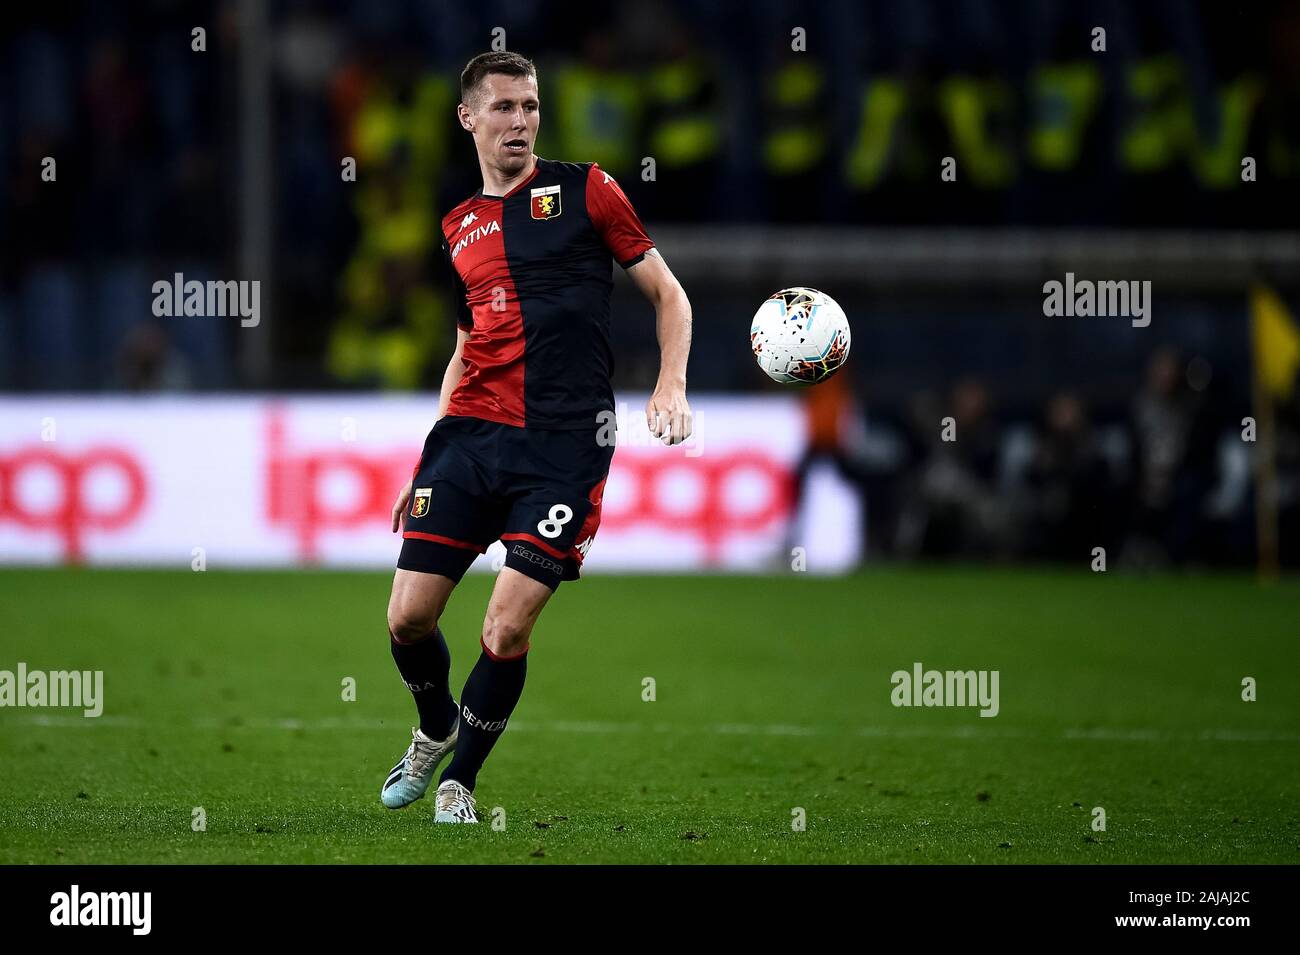 Genoa, Italy. 5 October, 2019: Lukas Lerager of Genoa CFC in action during the Serie A football match between Genoa CFC and AC Milan. AC Milan won 2-1 over Genoa CFC. Credit: Nicolò Campo/Alamy Live News Stock Photo